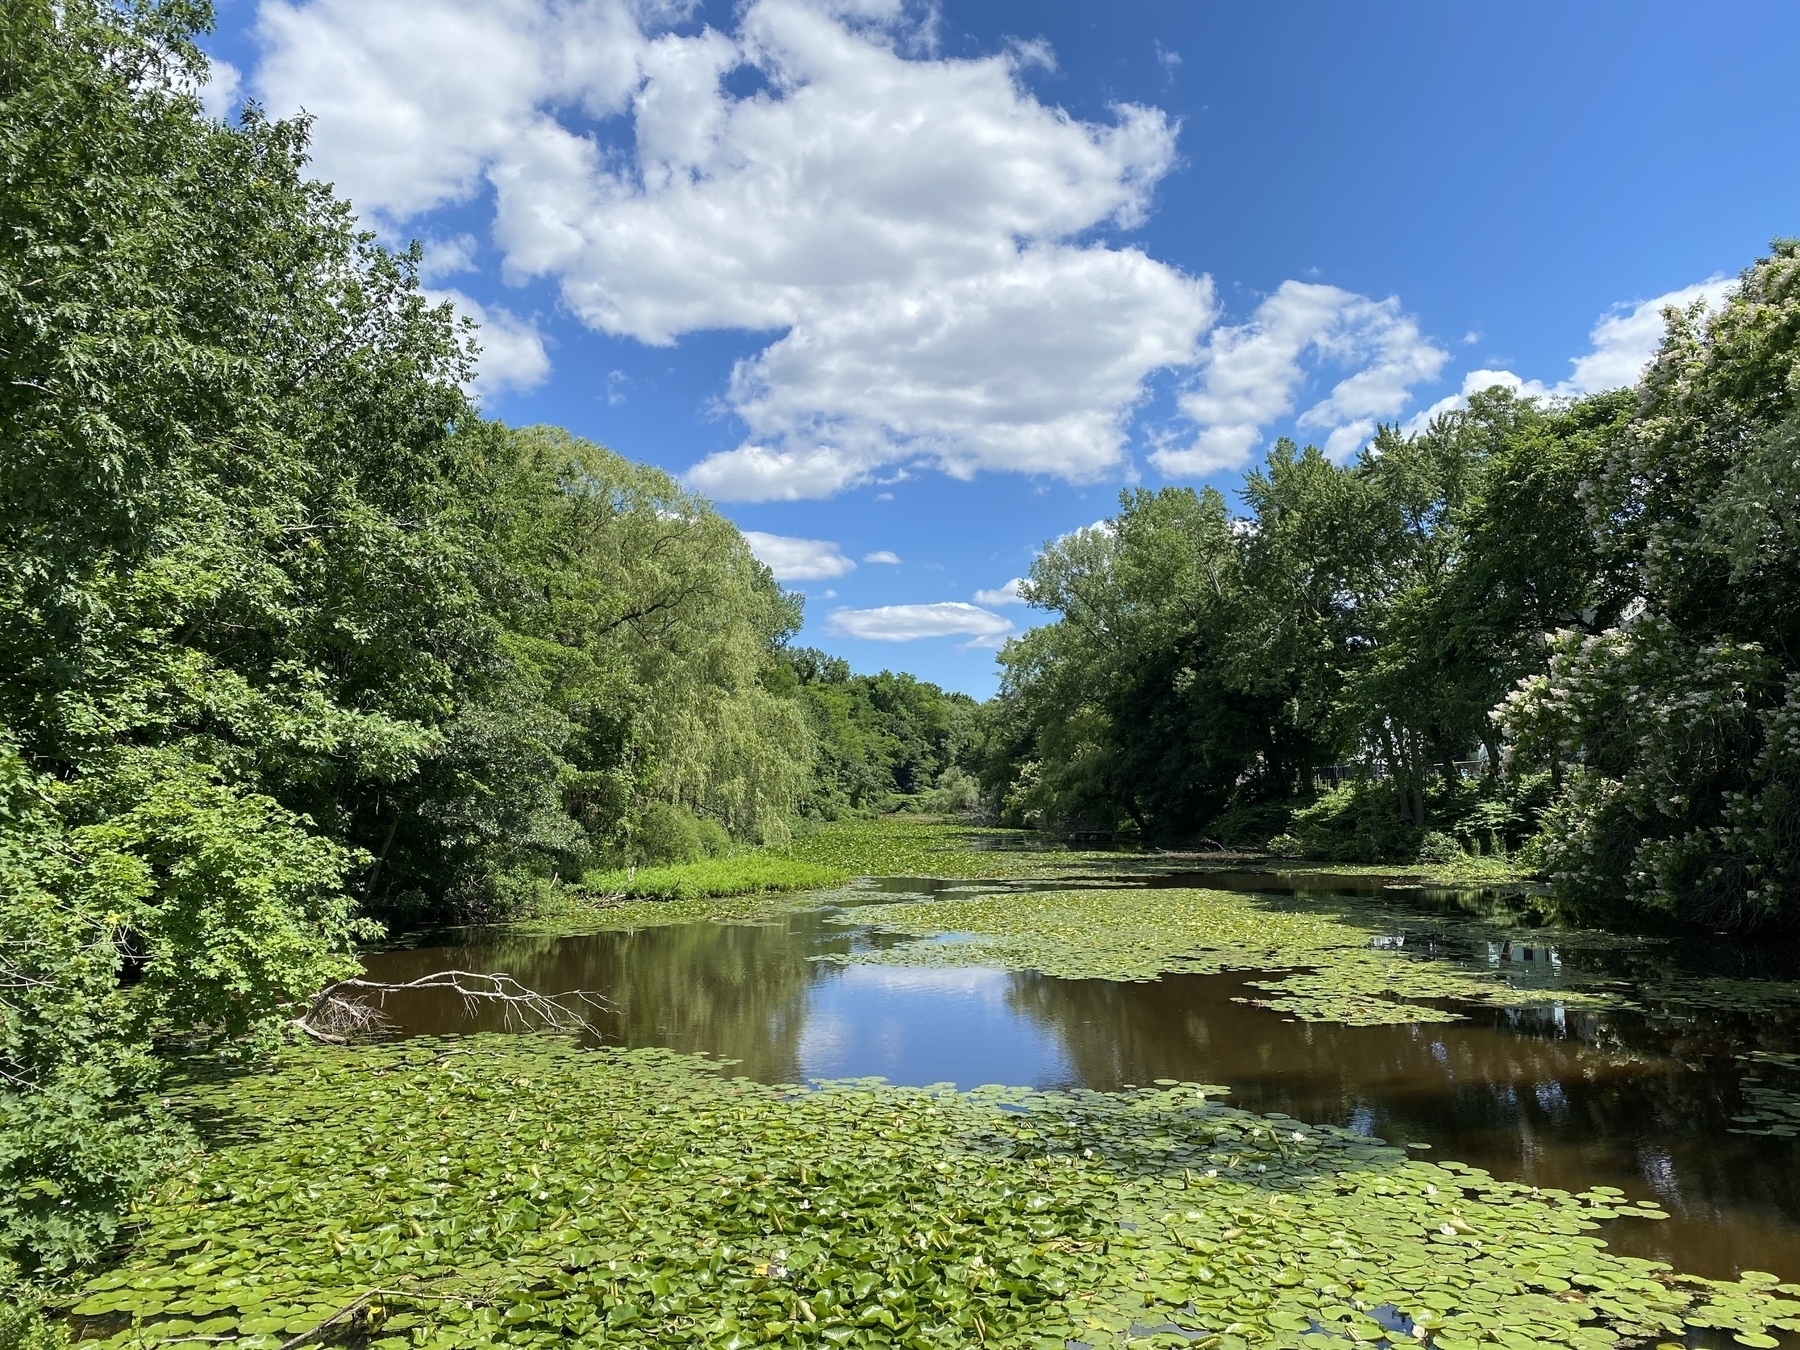 Afternoon view of a river covered in lily pads, with treeds on either bank and puffy white clouds in the blue sky above.